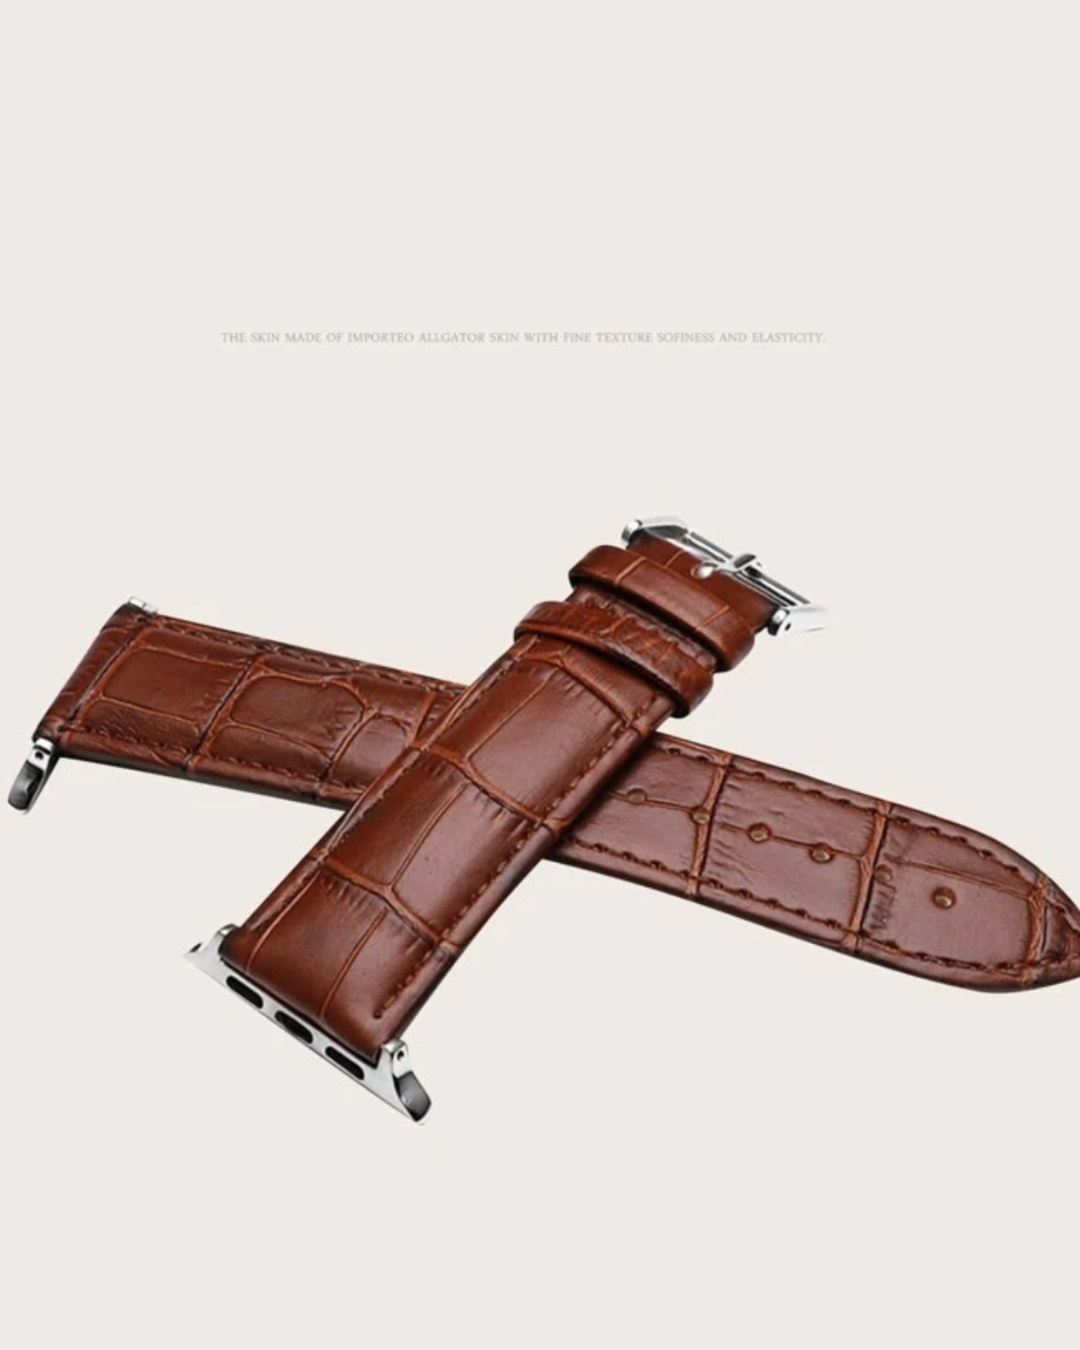 Apple Watch Leather Croc Band